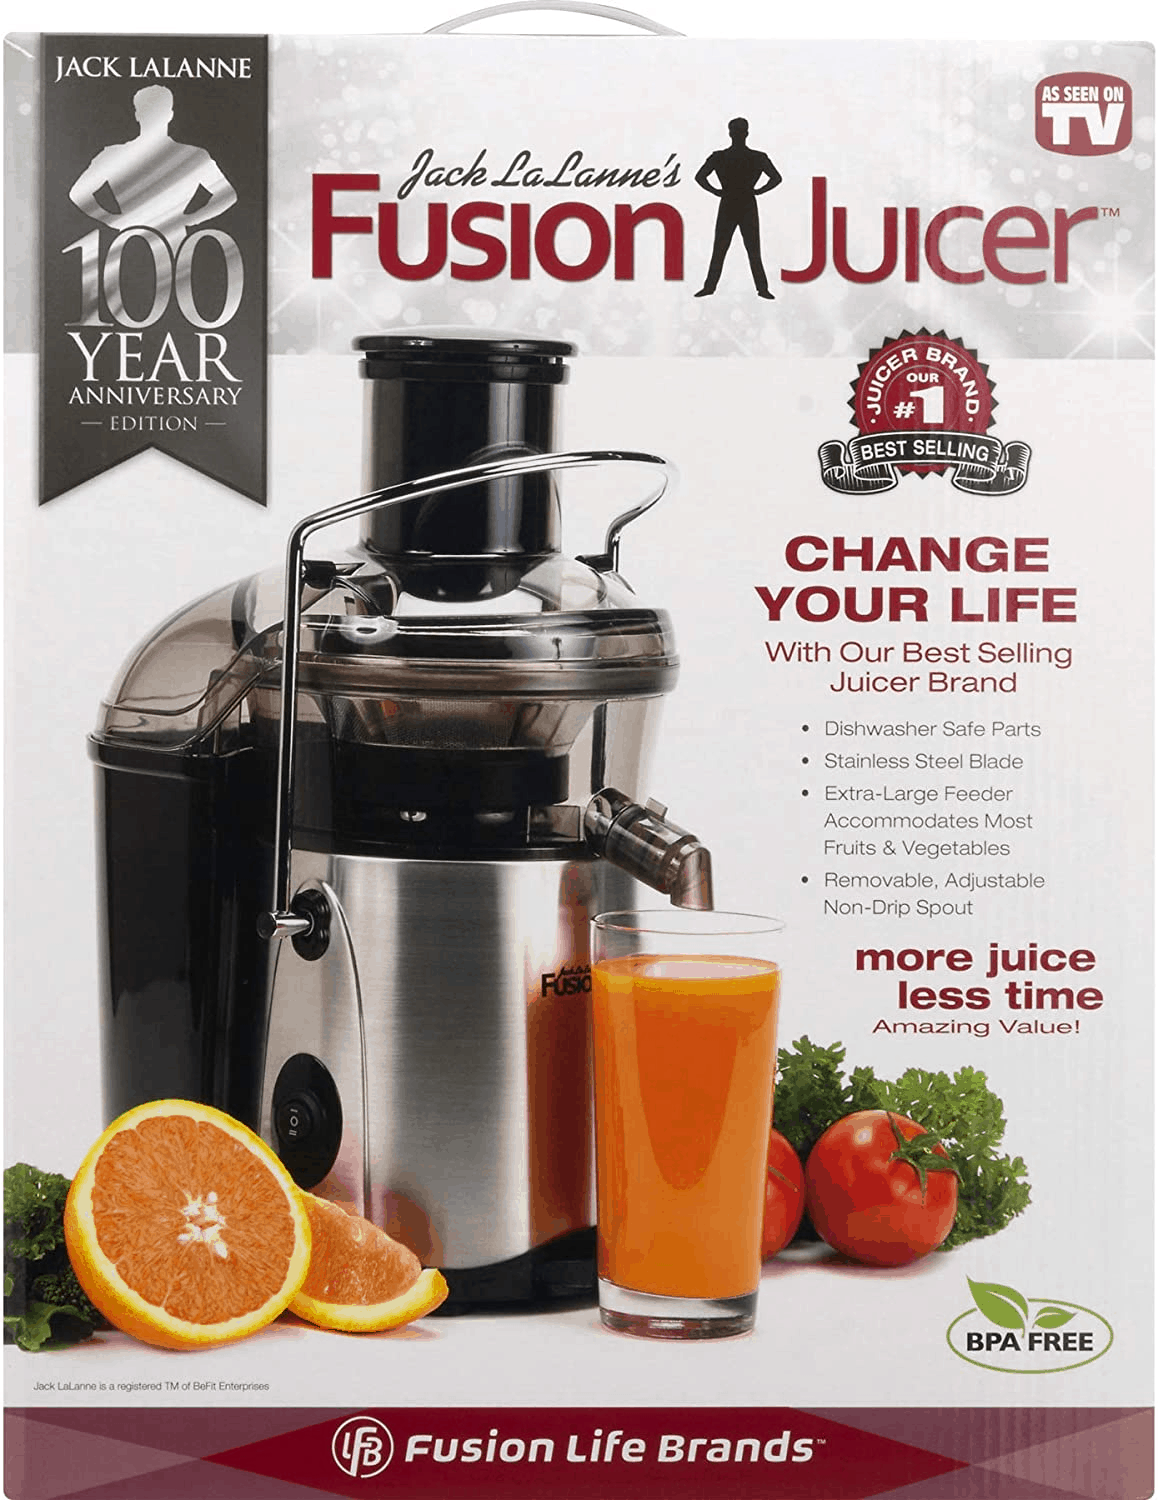 About the Fusion Juicer